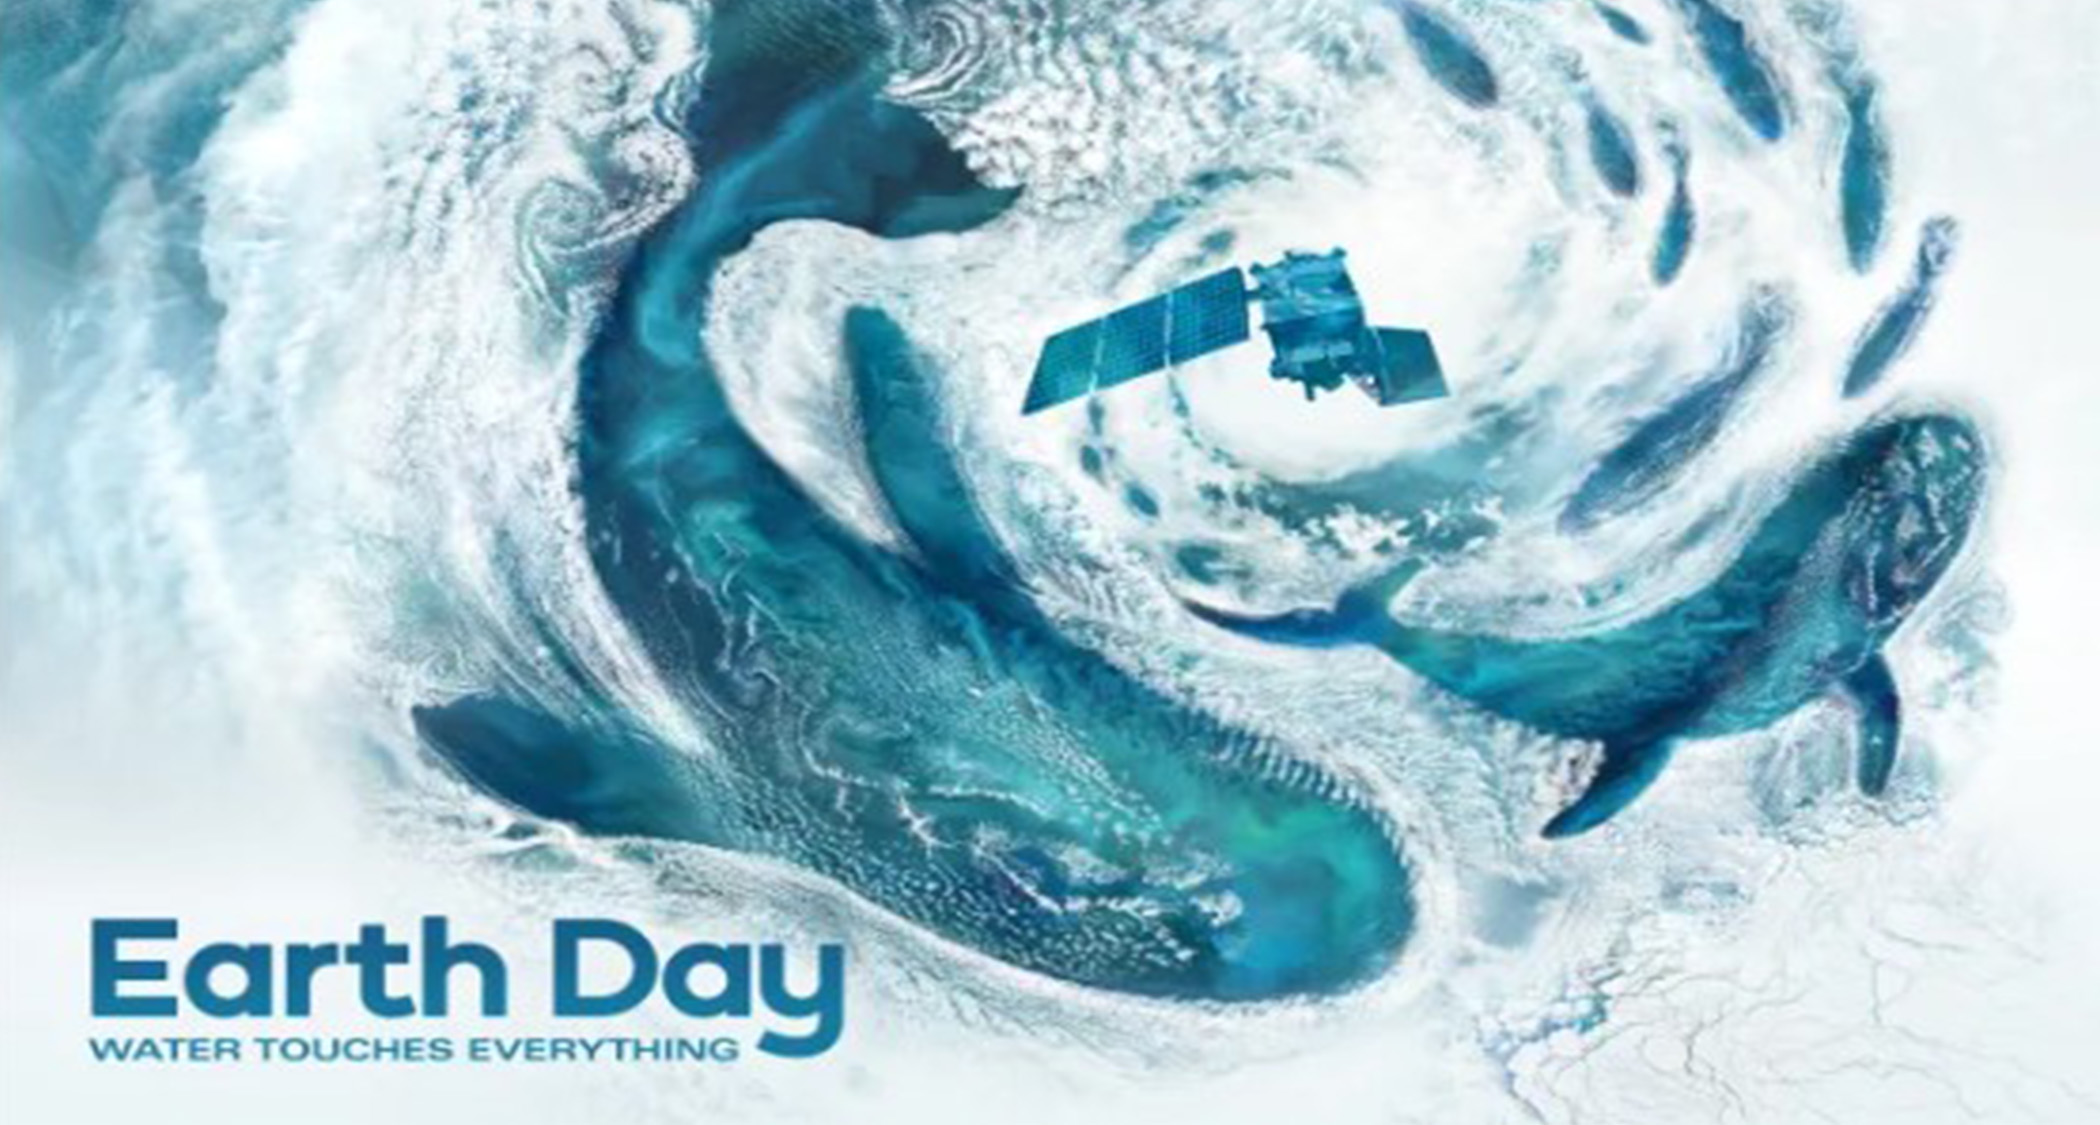 Earth Day Poster from NASA - Water Touches Everything